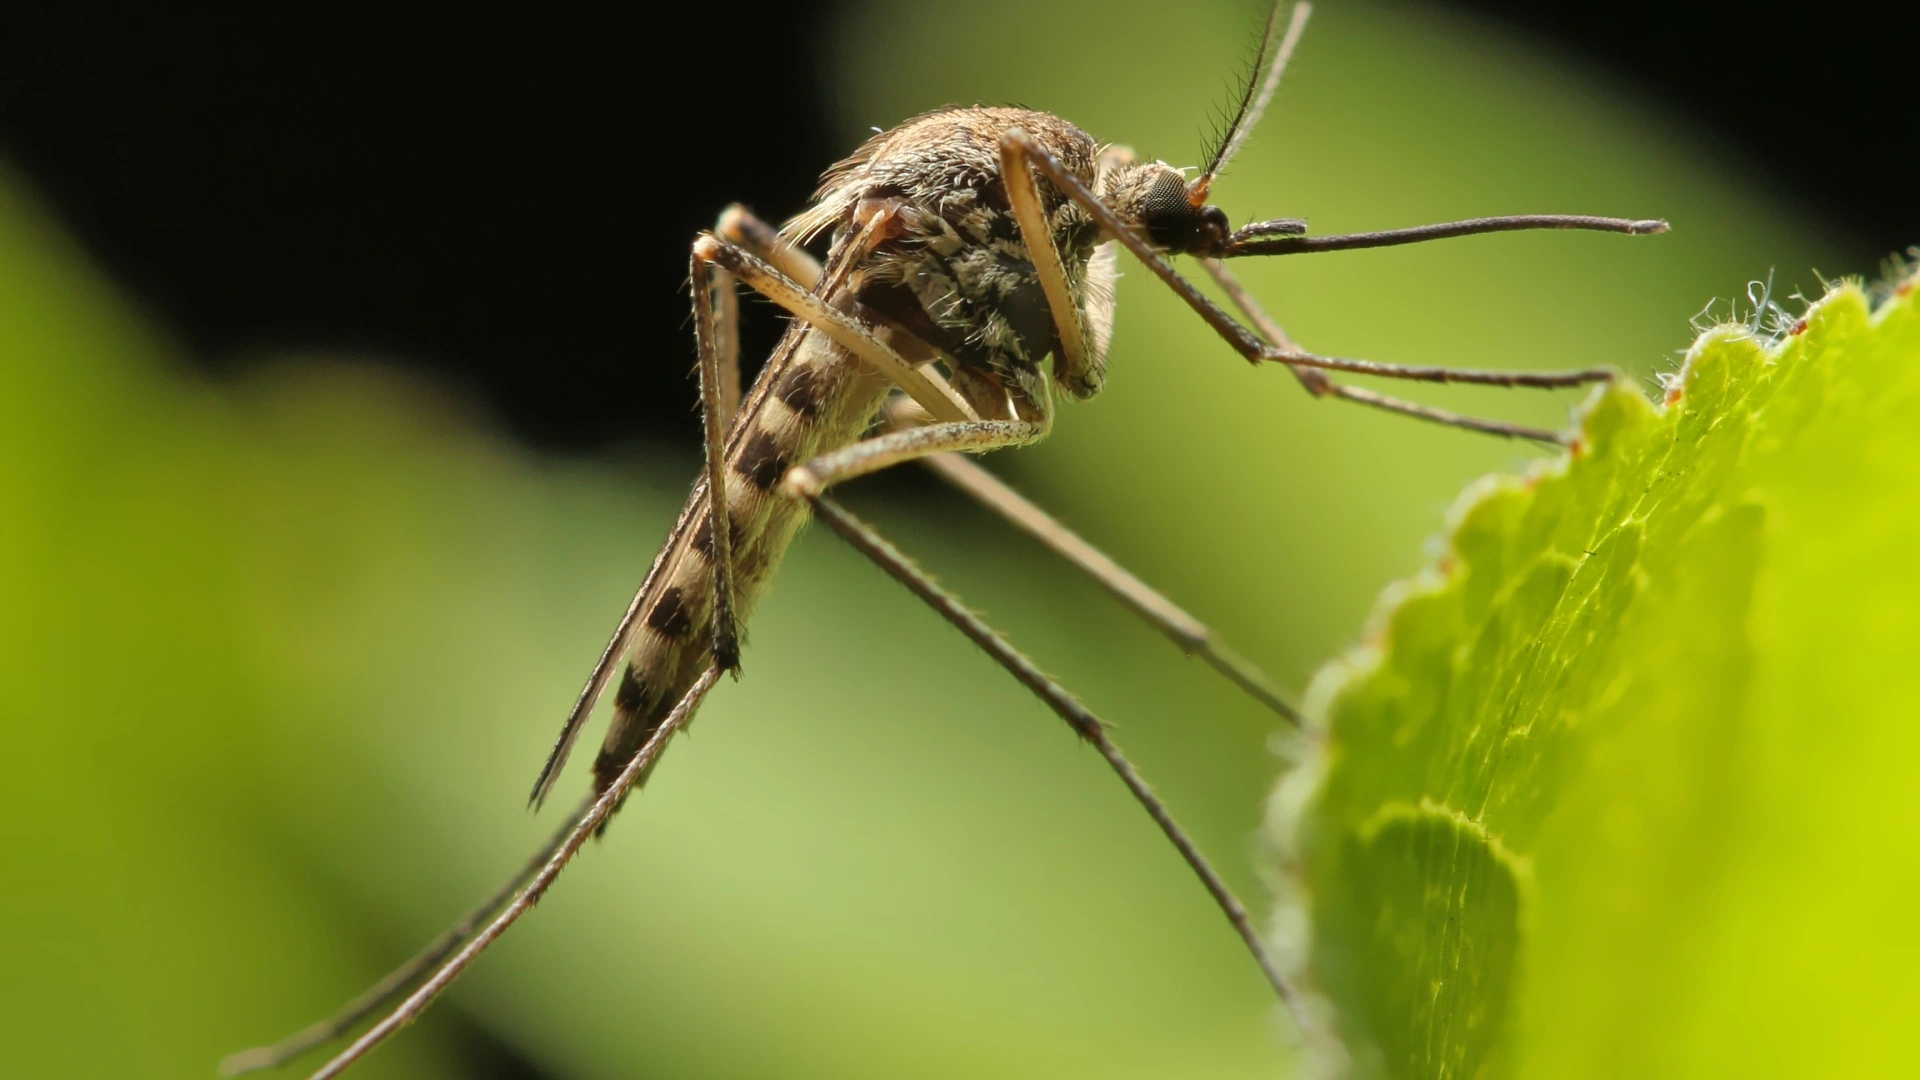 Don’t Try to DIY Mosquito Control - Contact Professionals Instead!